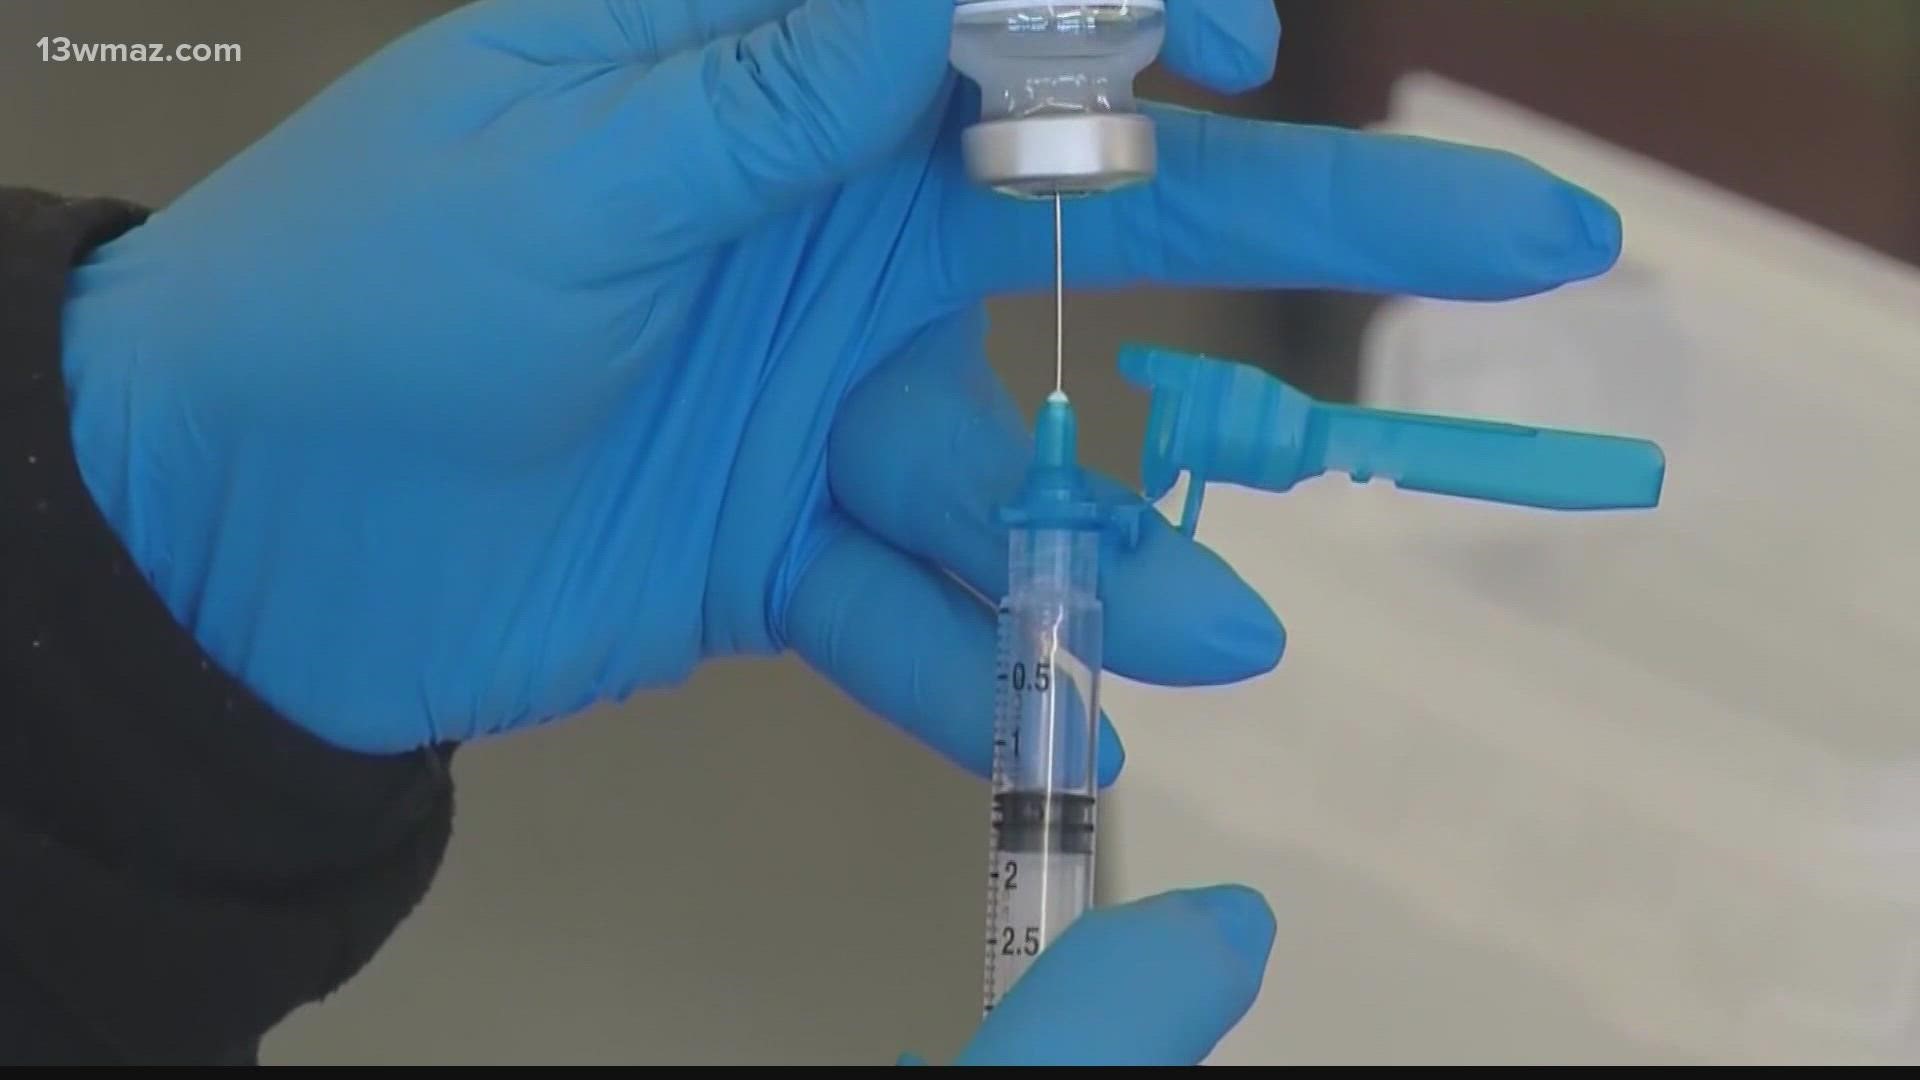 Health officials say those who meet criteria may get the shot four months after their last dose